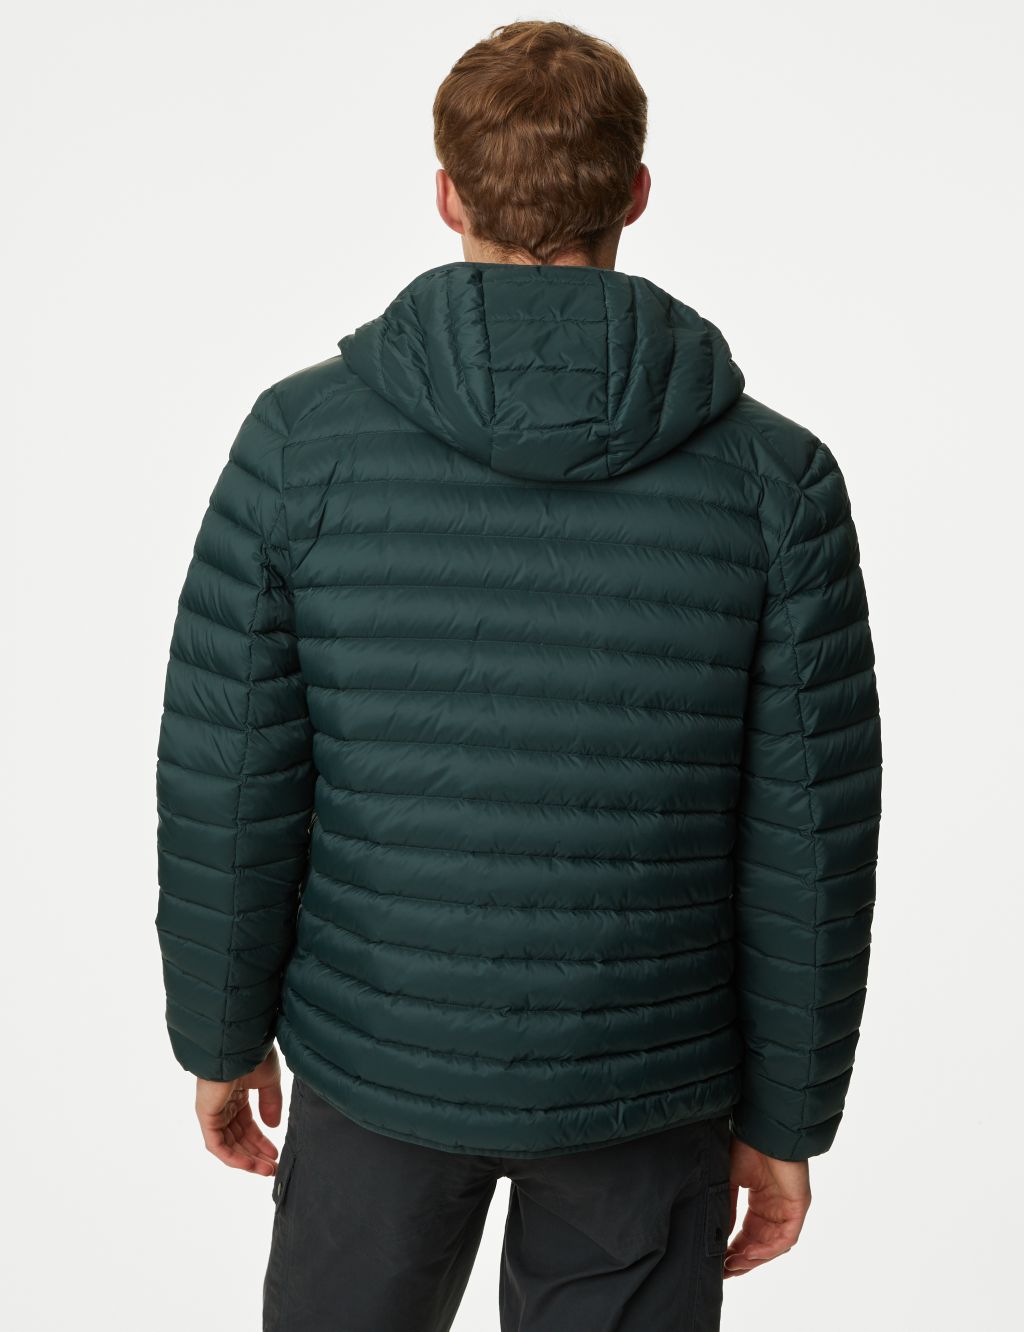 Feather and Down Jacket with Stormwear™ image 6